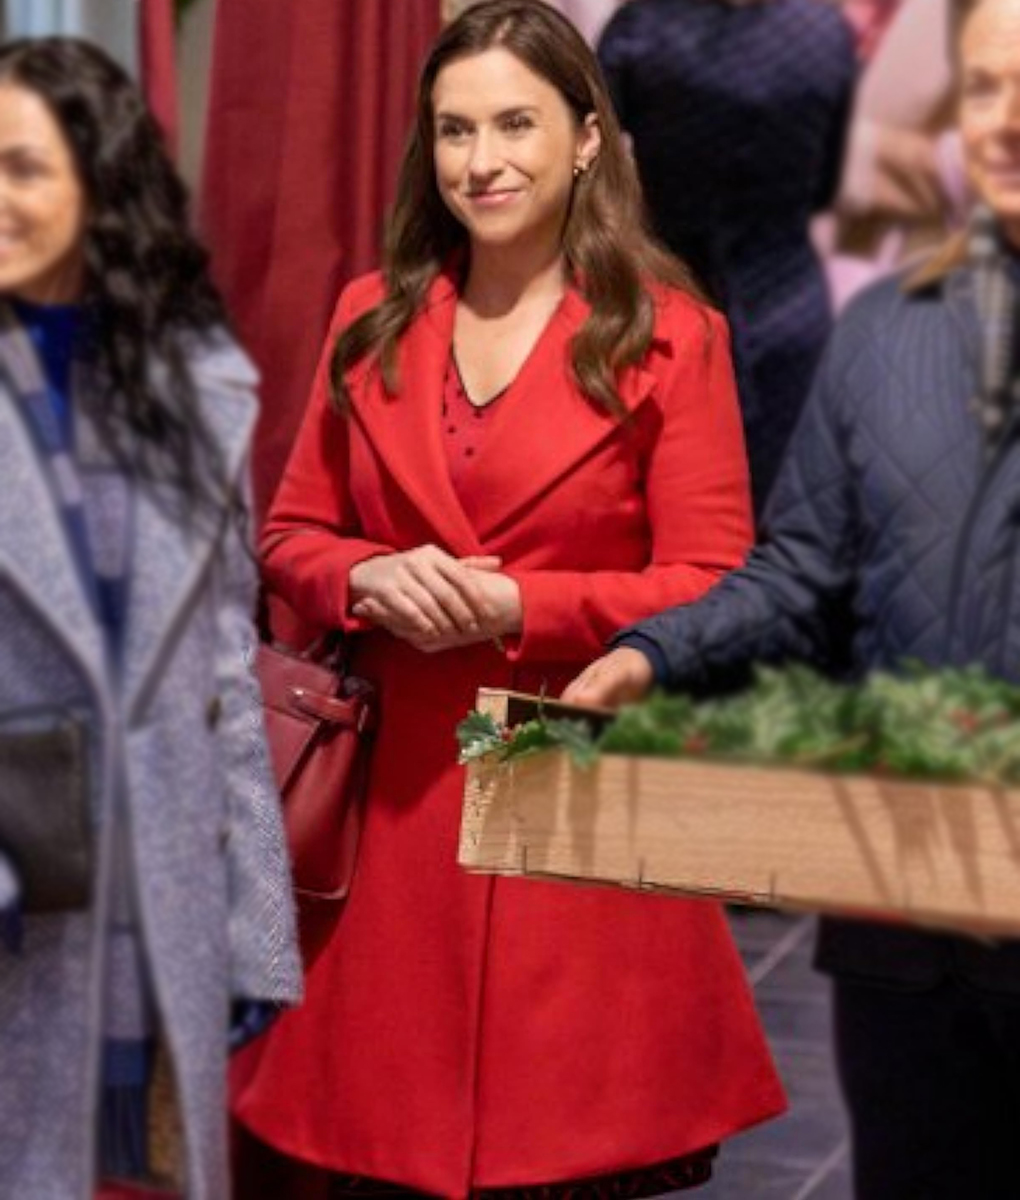 A Merry Scottish Christmas Lacey Chabert Red Coat